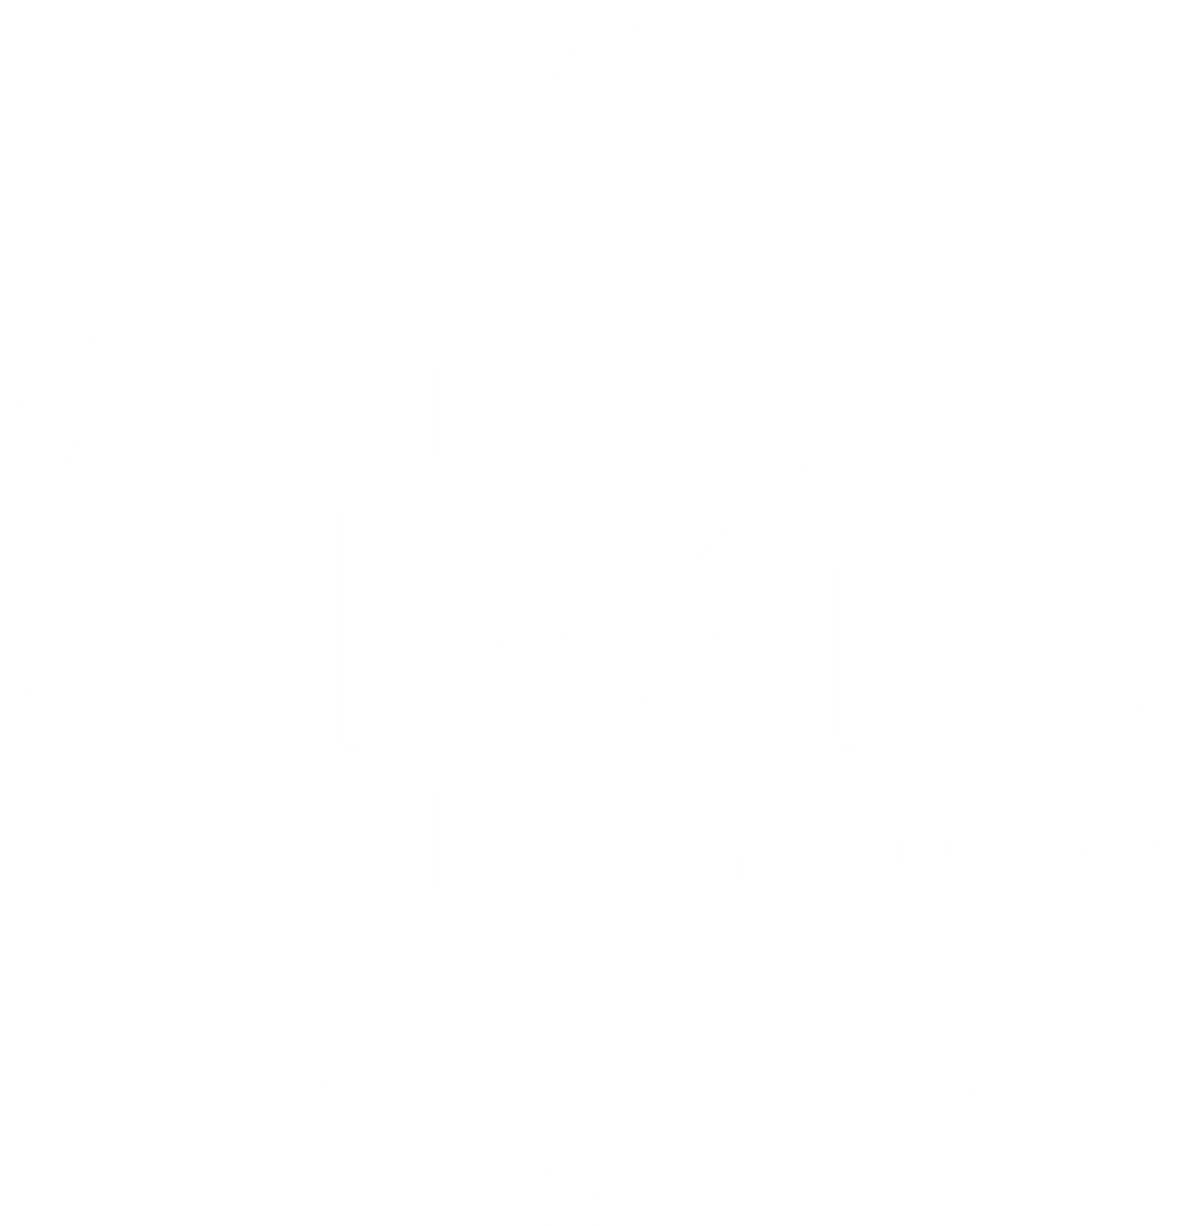 Patches - The Mad Hatter Company